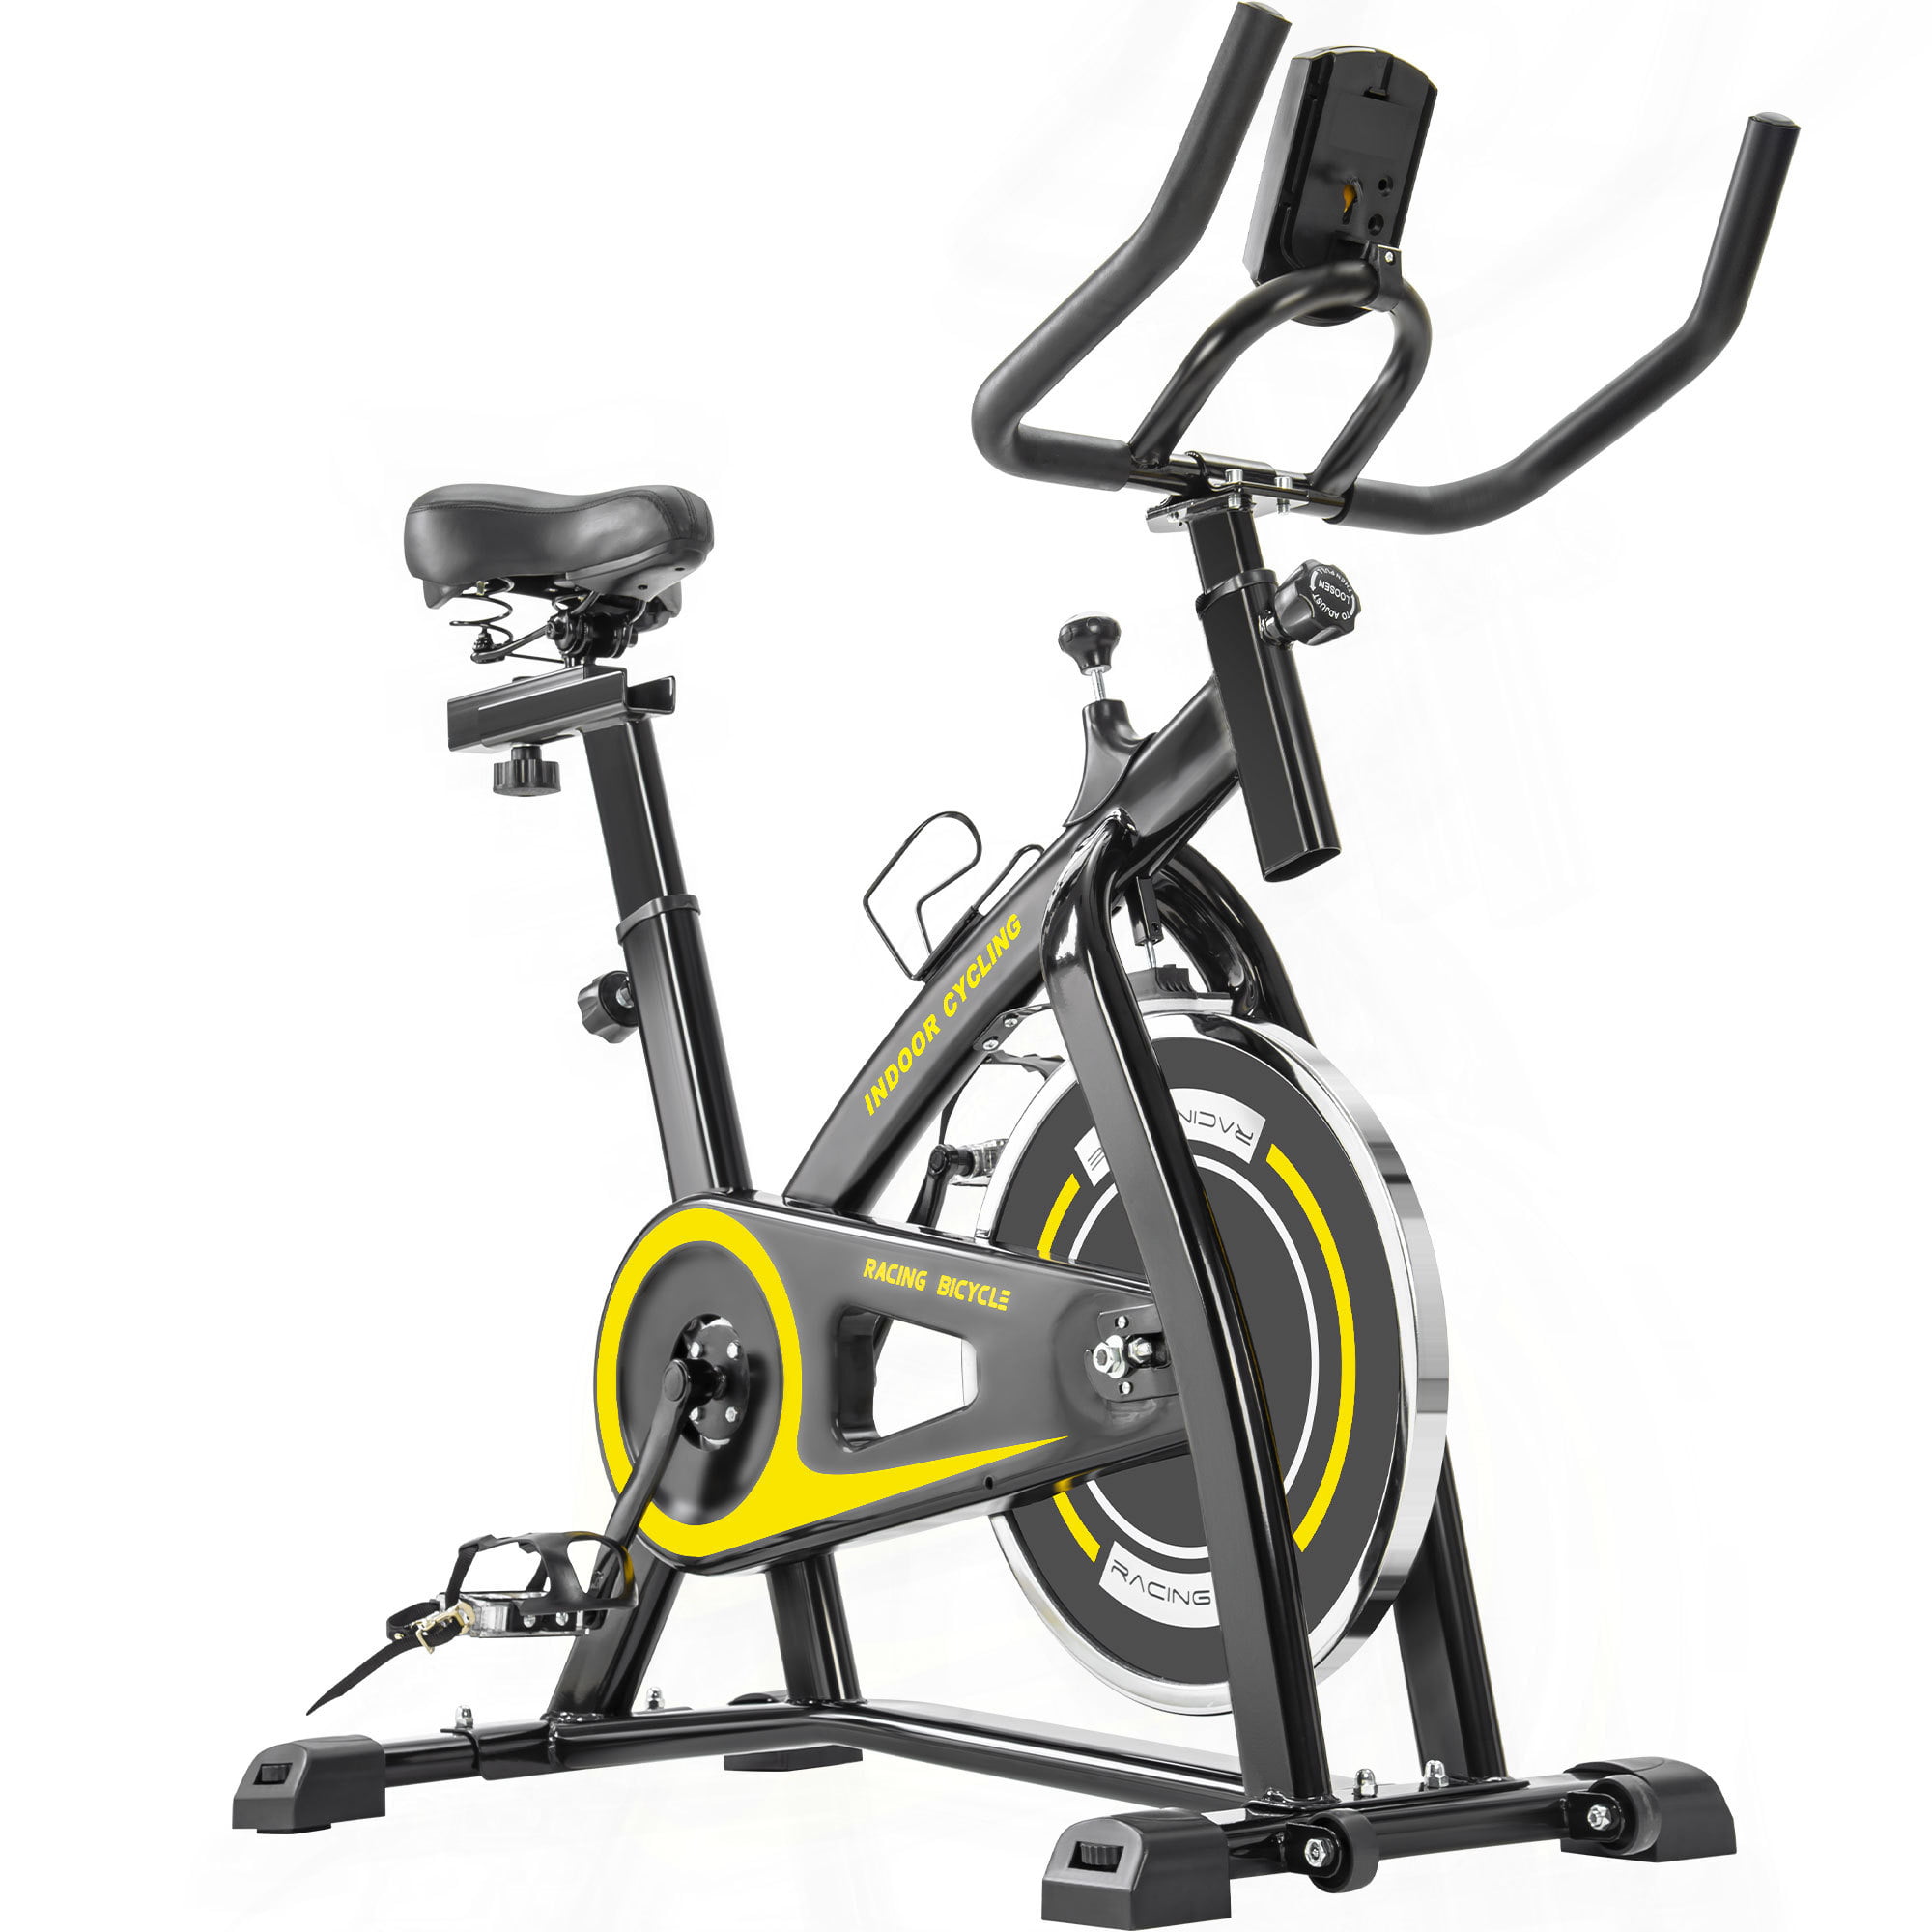 Details about   Stationary Exercise Bike Indoor Cycling Bicycle Aerobics Workout Gym Fitness US 